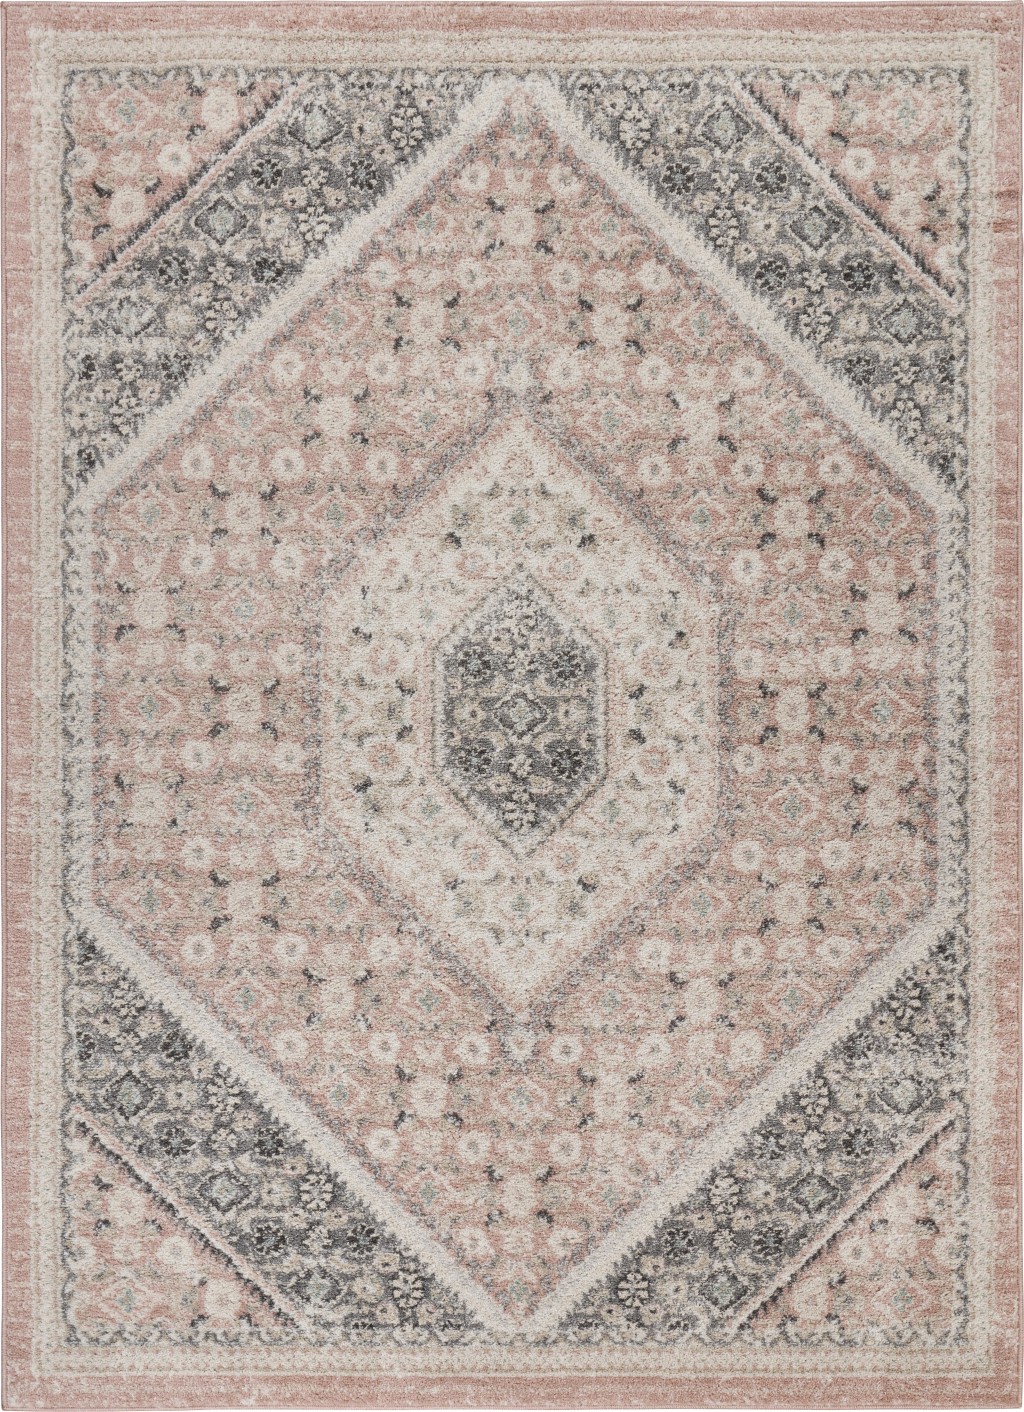 5’ x 7’ Gray and Soft Pink Traditional Area Rug-395600-1